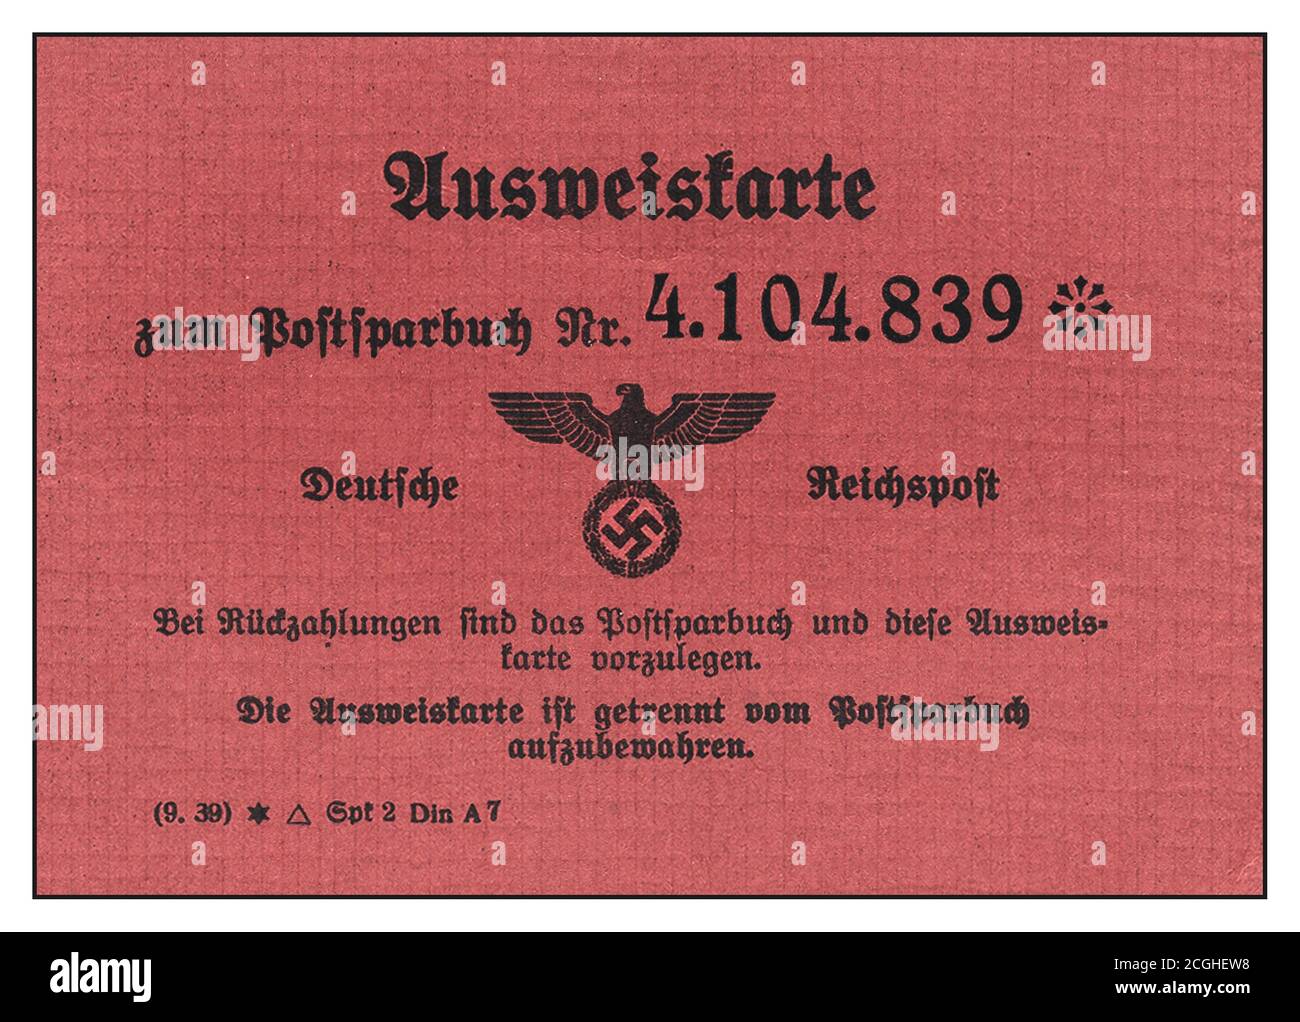 WW2 1940’s Nazi Germany Identity Card -AUSWEISTARTE for Reichspost German personal savings account. Used in conjunction with a separate savings account book. Stock Photo